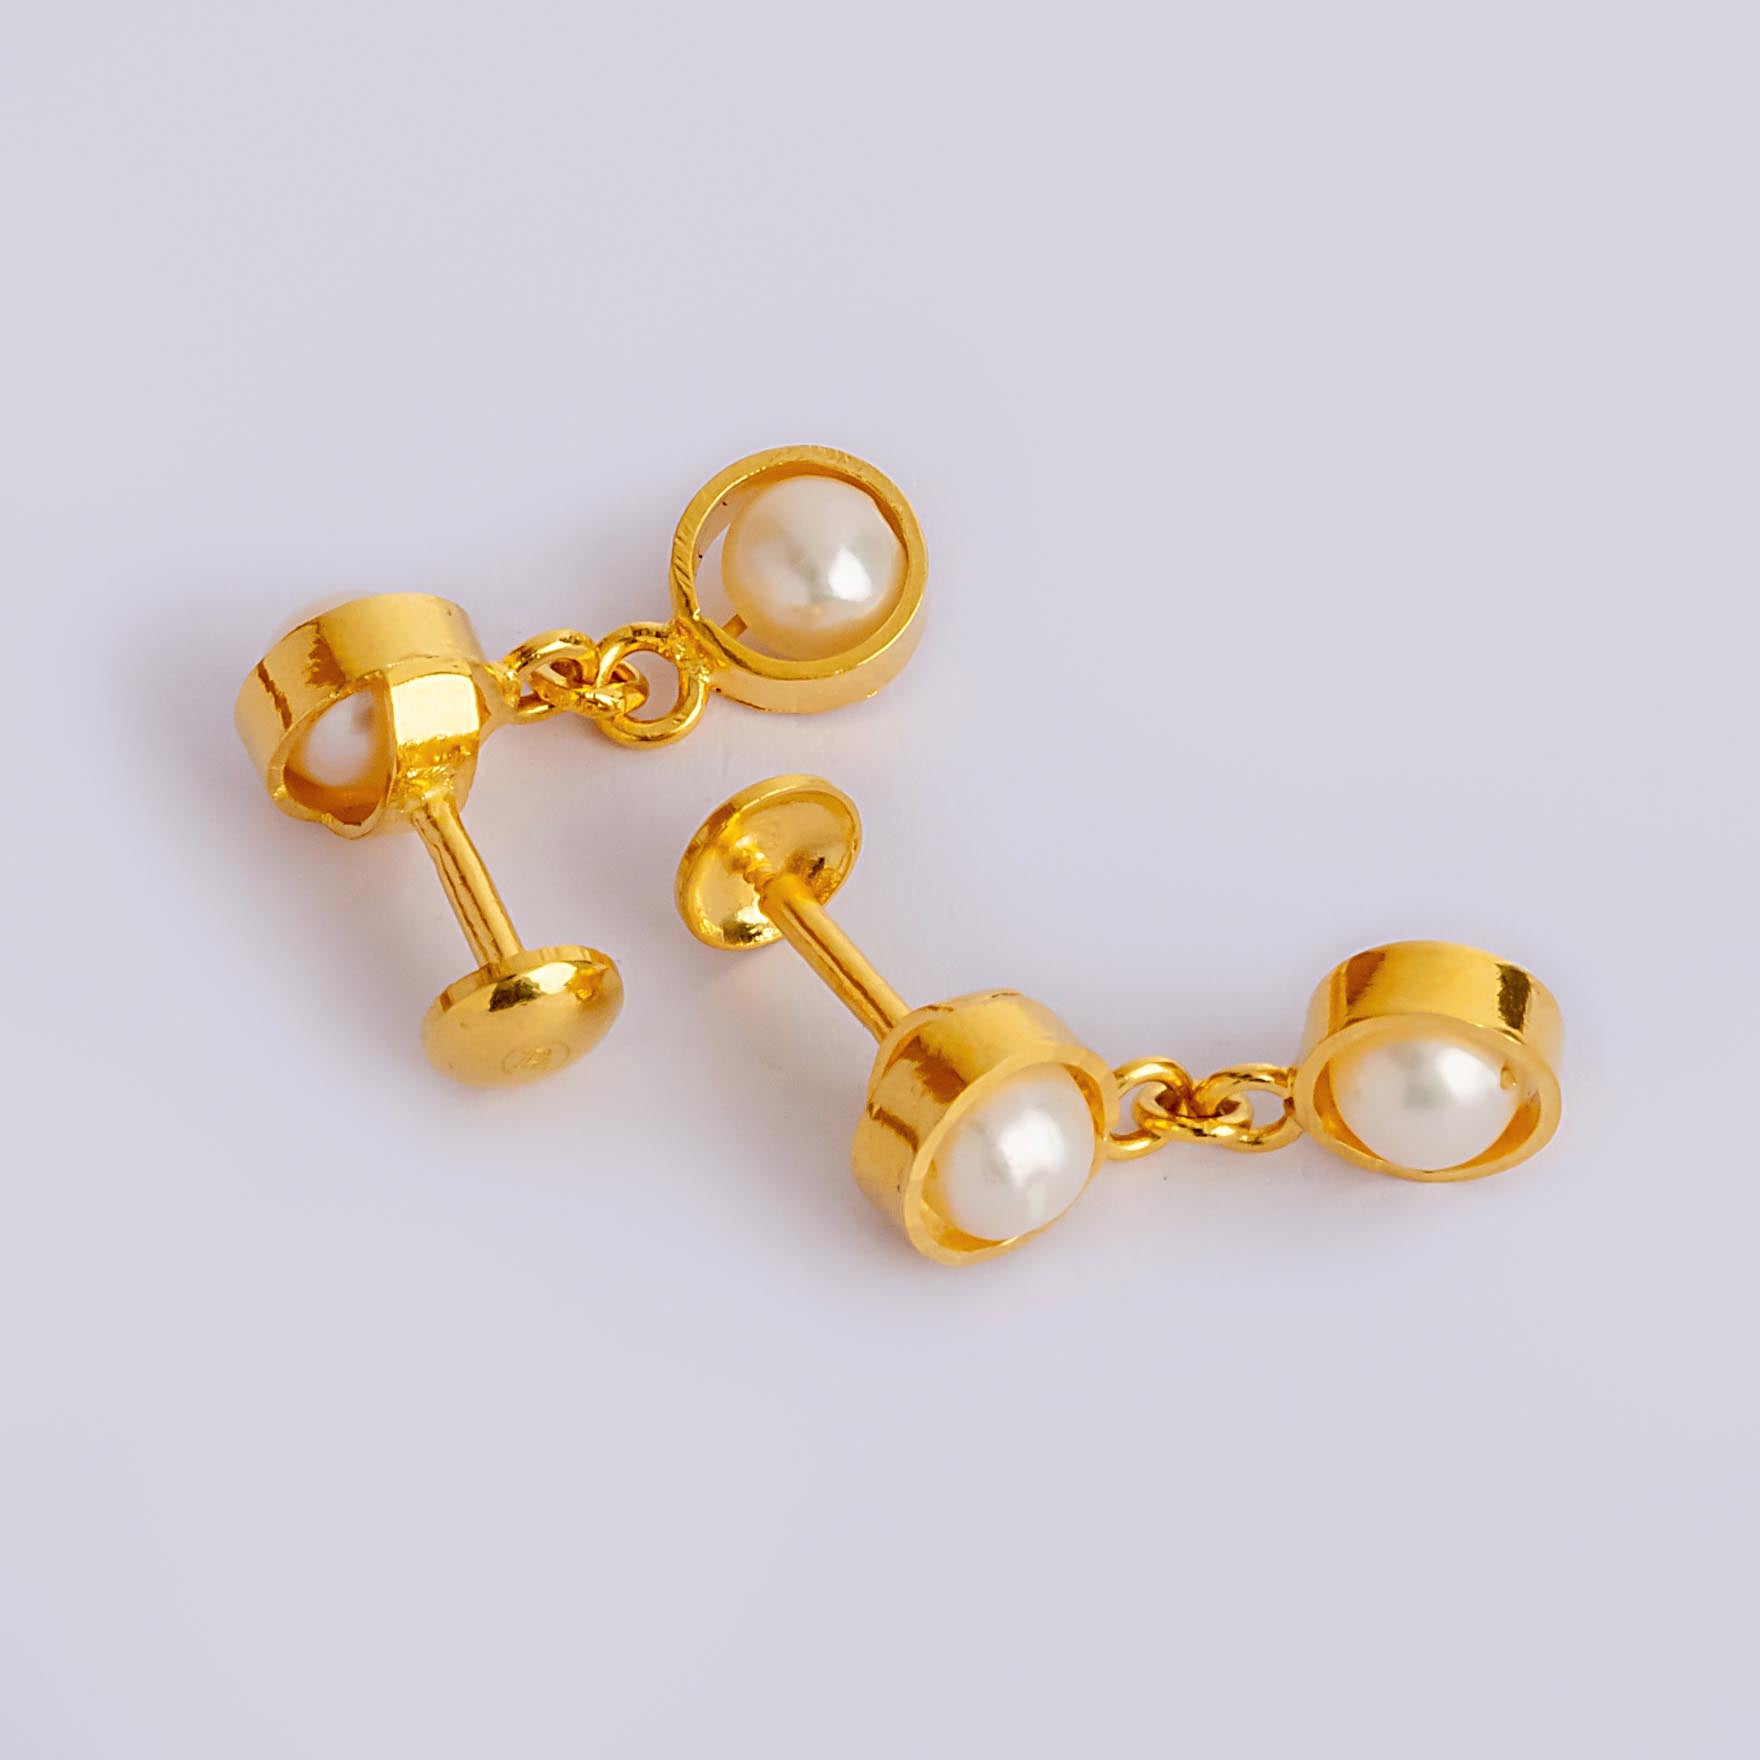 Pearl gold Earrings at Best Price